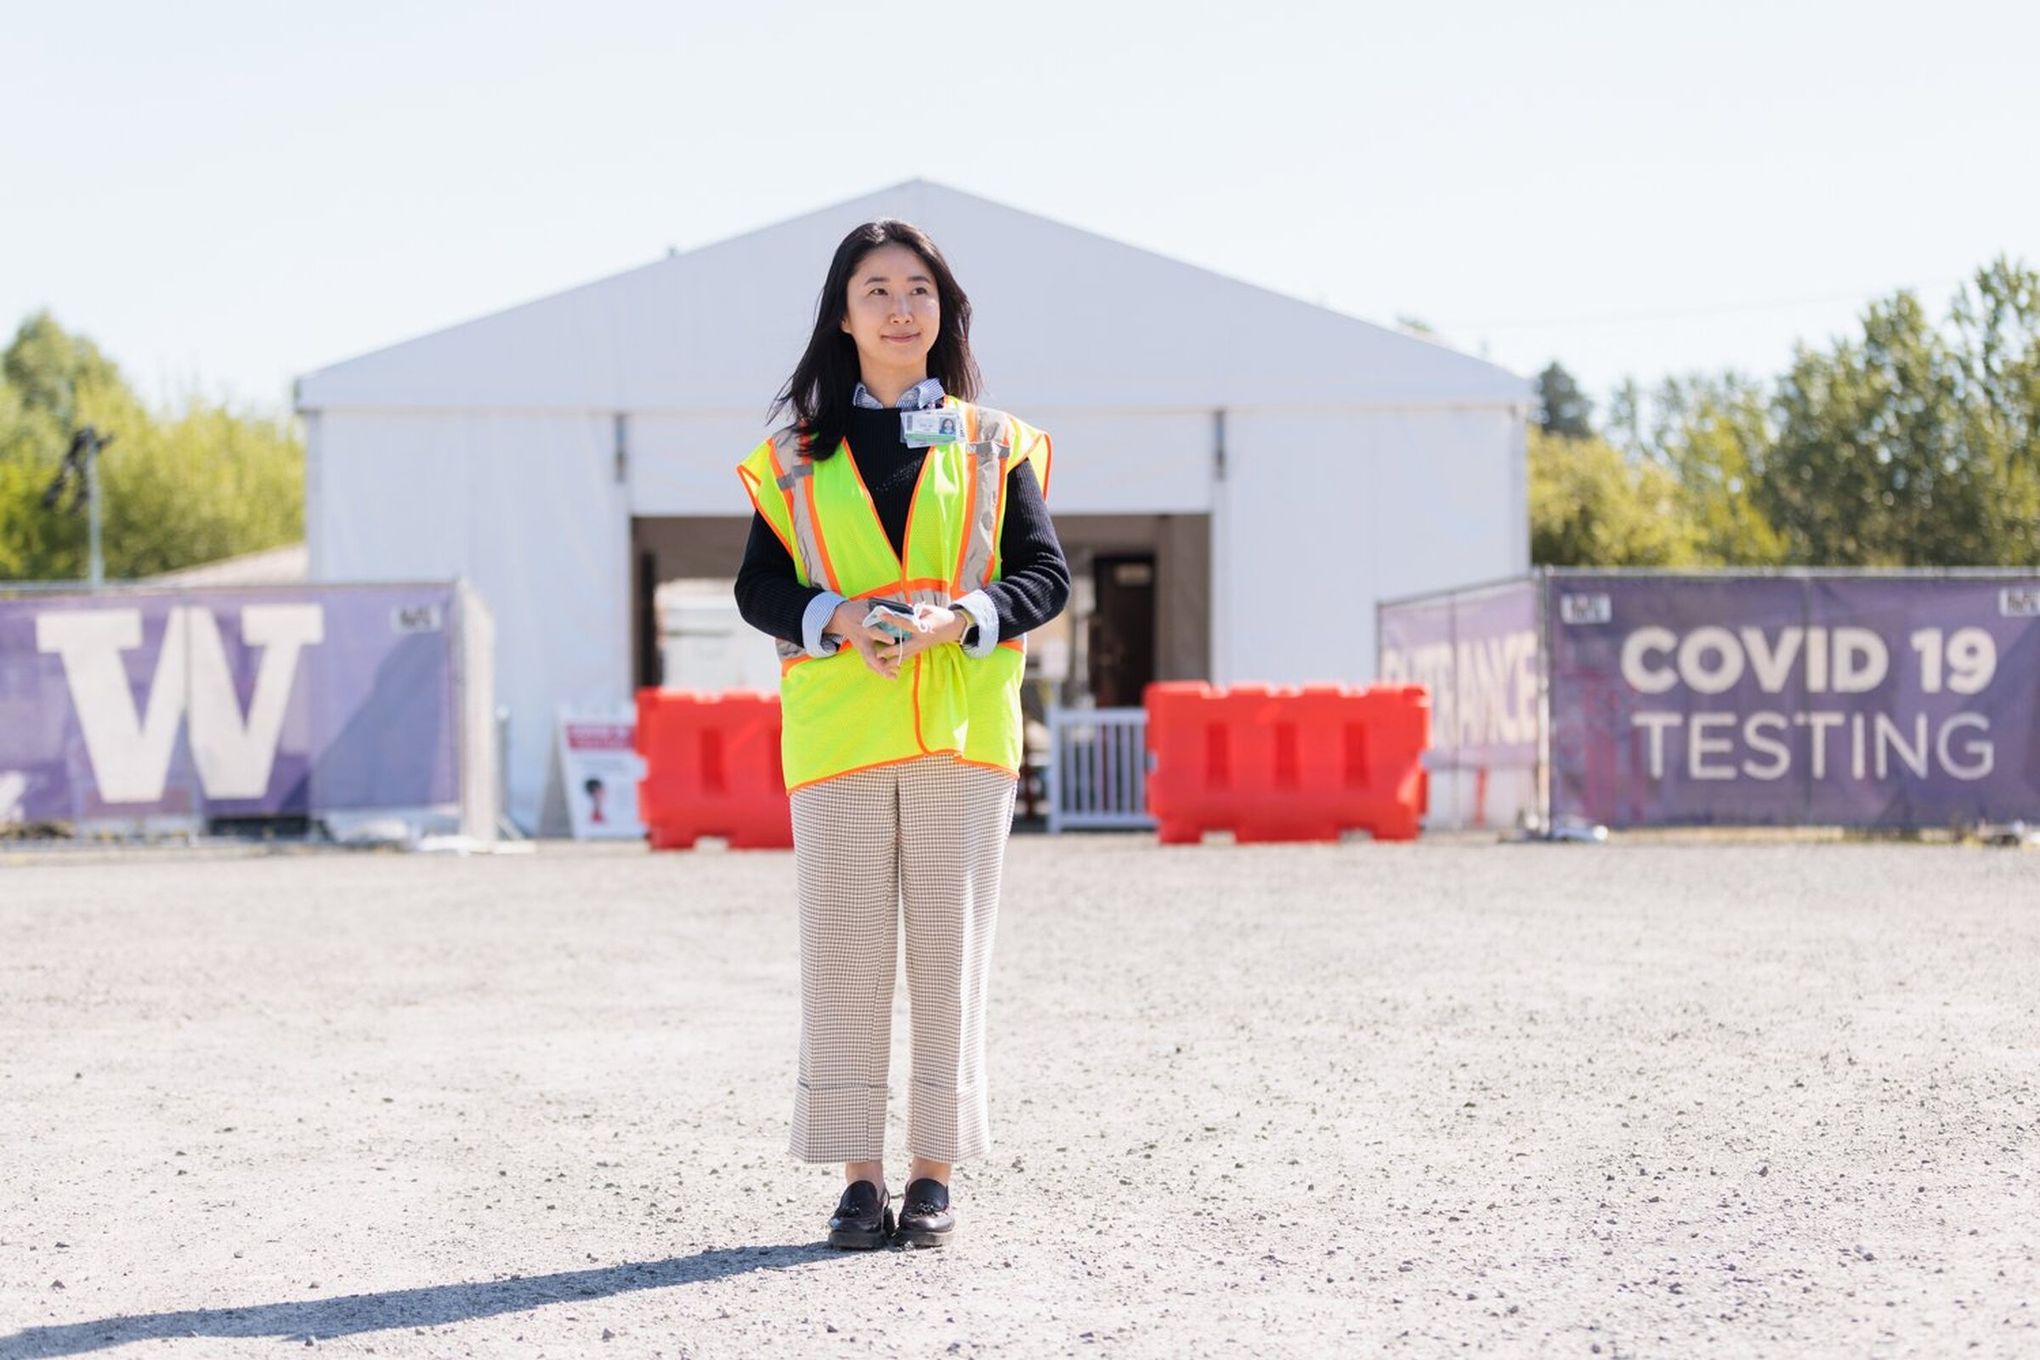 A senior testing site manager at the University of Washington COVID-19 testing site in Seattle.